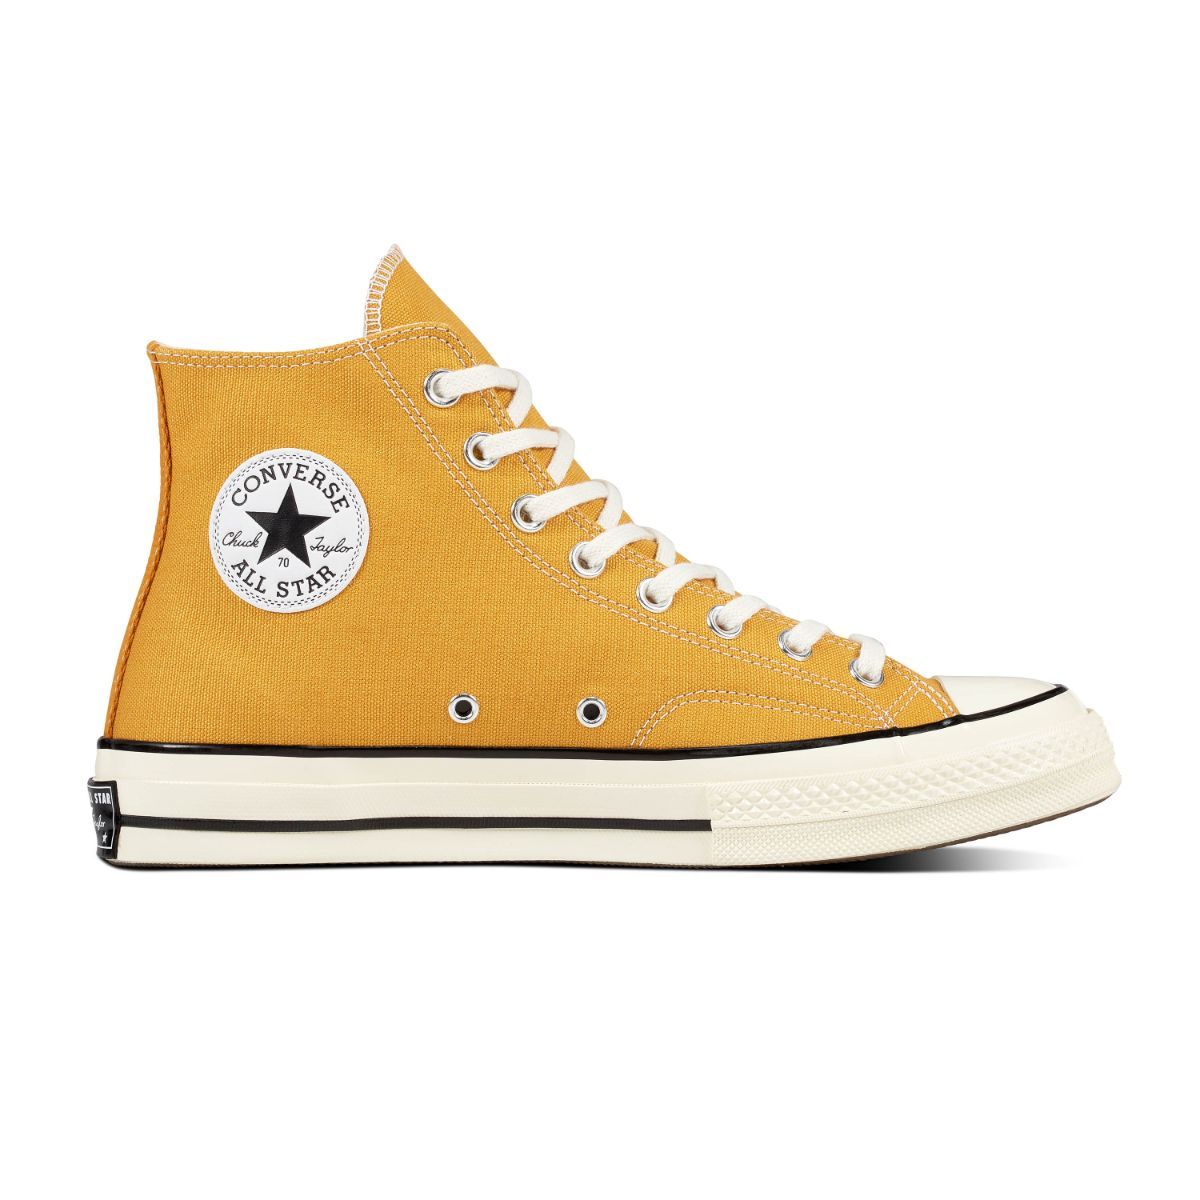 shaniqwa jarvis x converse chuck taylor all star cx release date